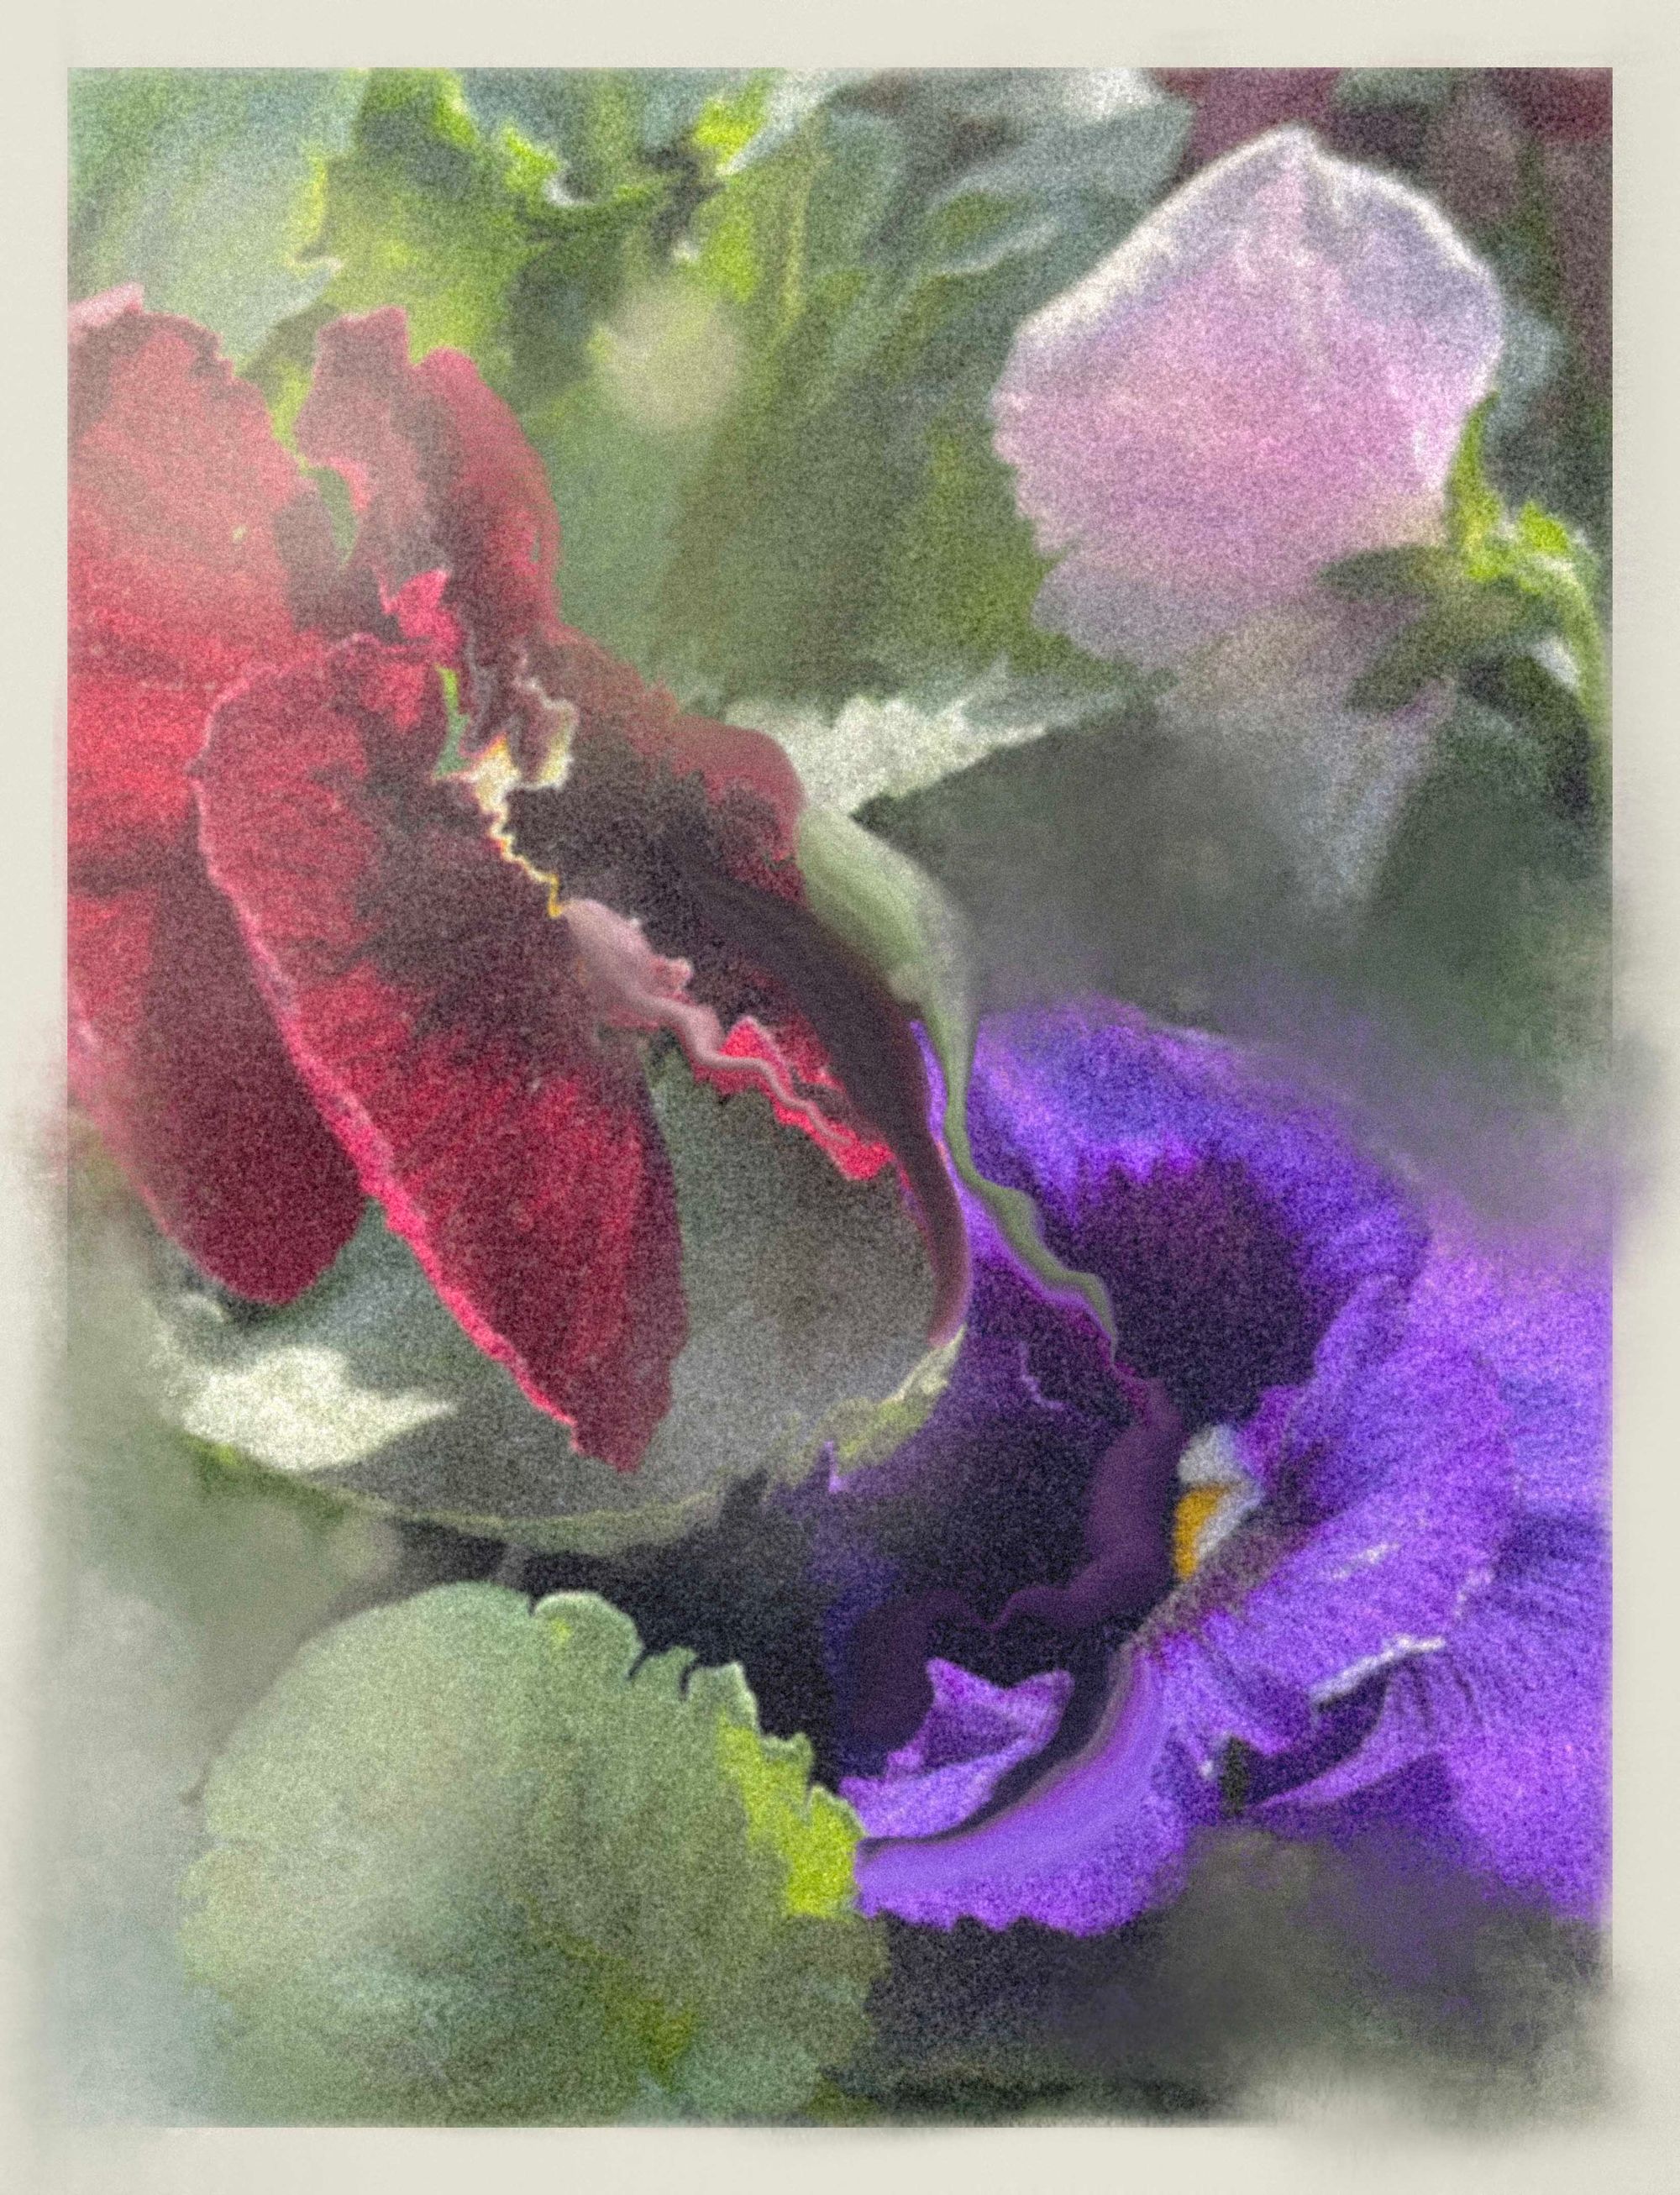 Ornament 10
# Minted 17 - Mint price: .01 ETH
10/05/2022  10/06/2022
Medium: Digital Composition

My mom dropped by some pansies to plant now that the weather is getting cooler. 
